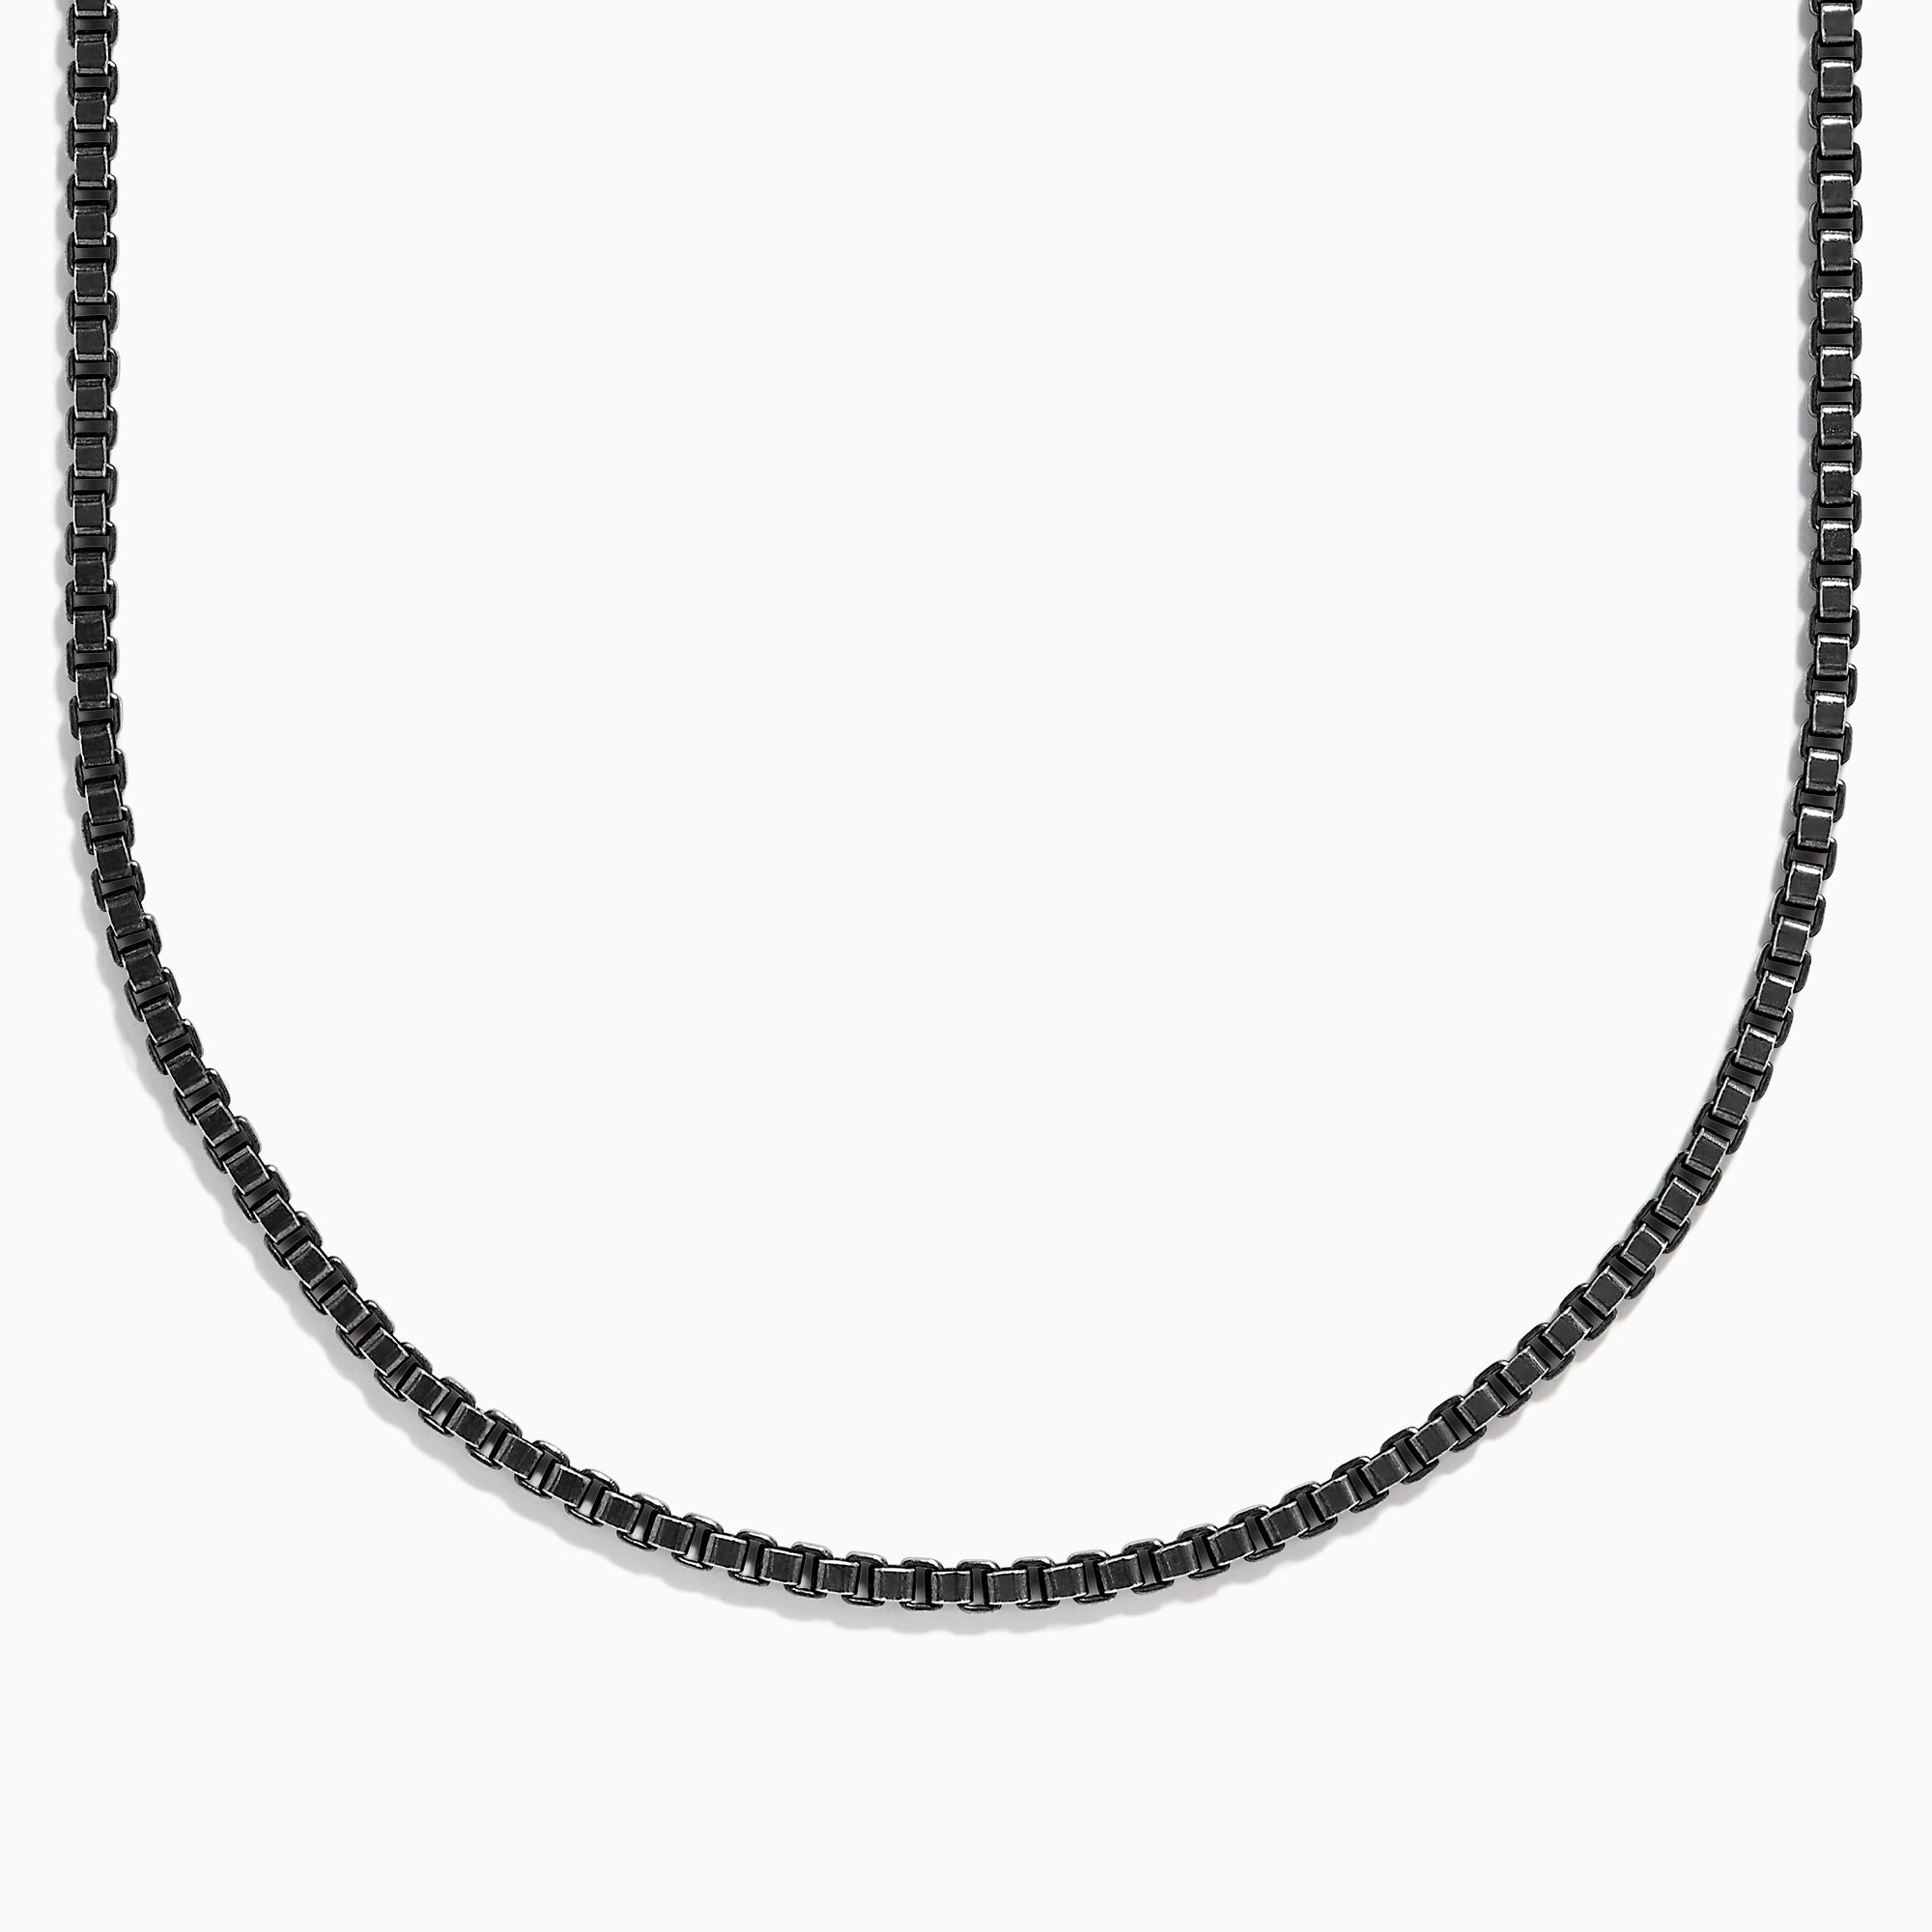 CARITATE Two Tone Silver/Black-Blue Chain Necklaces For Men and Women, 6mm  10mm Hypoallergenic Stainless Steel Cuban Link Chain For Boys Girls, Mens  Thick Diamond Cut Black Necklace Jewelry Gifts | Amazon.com